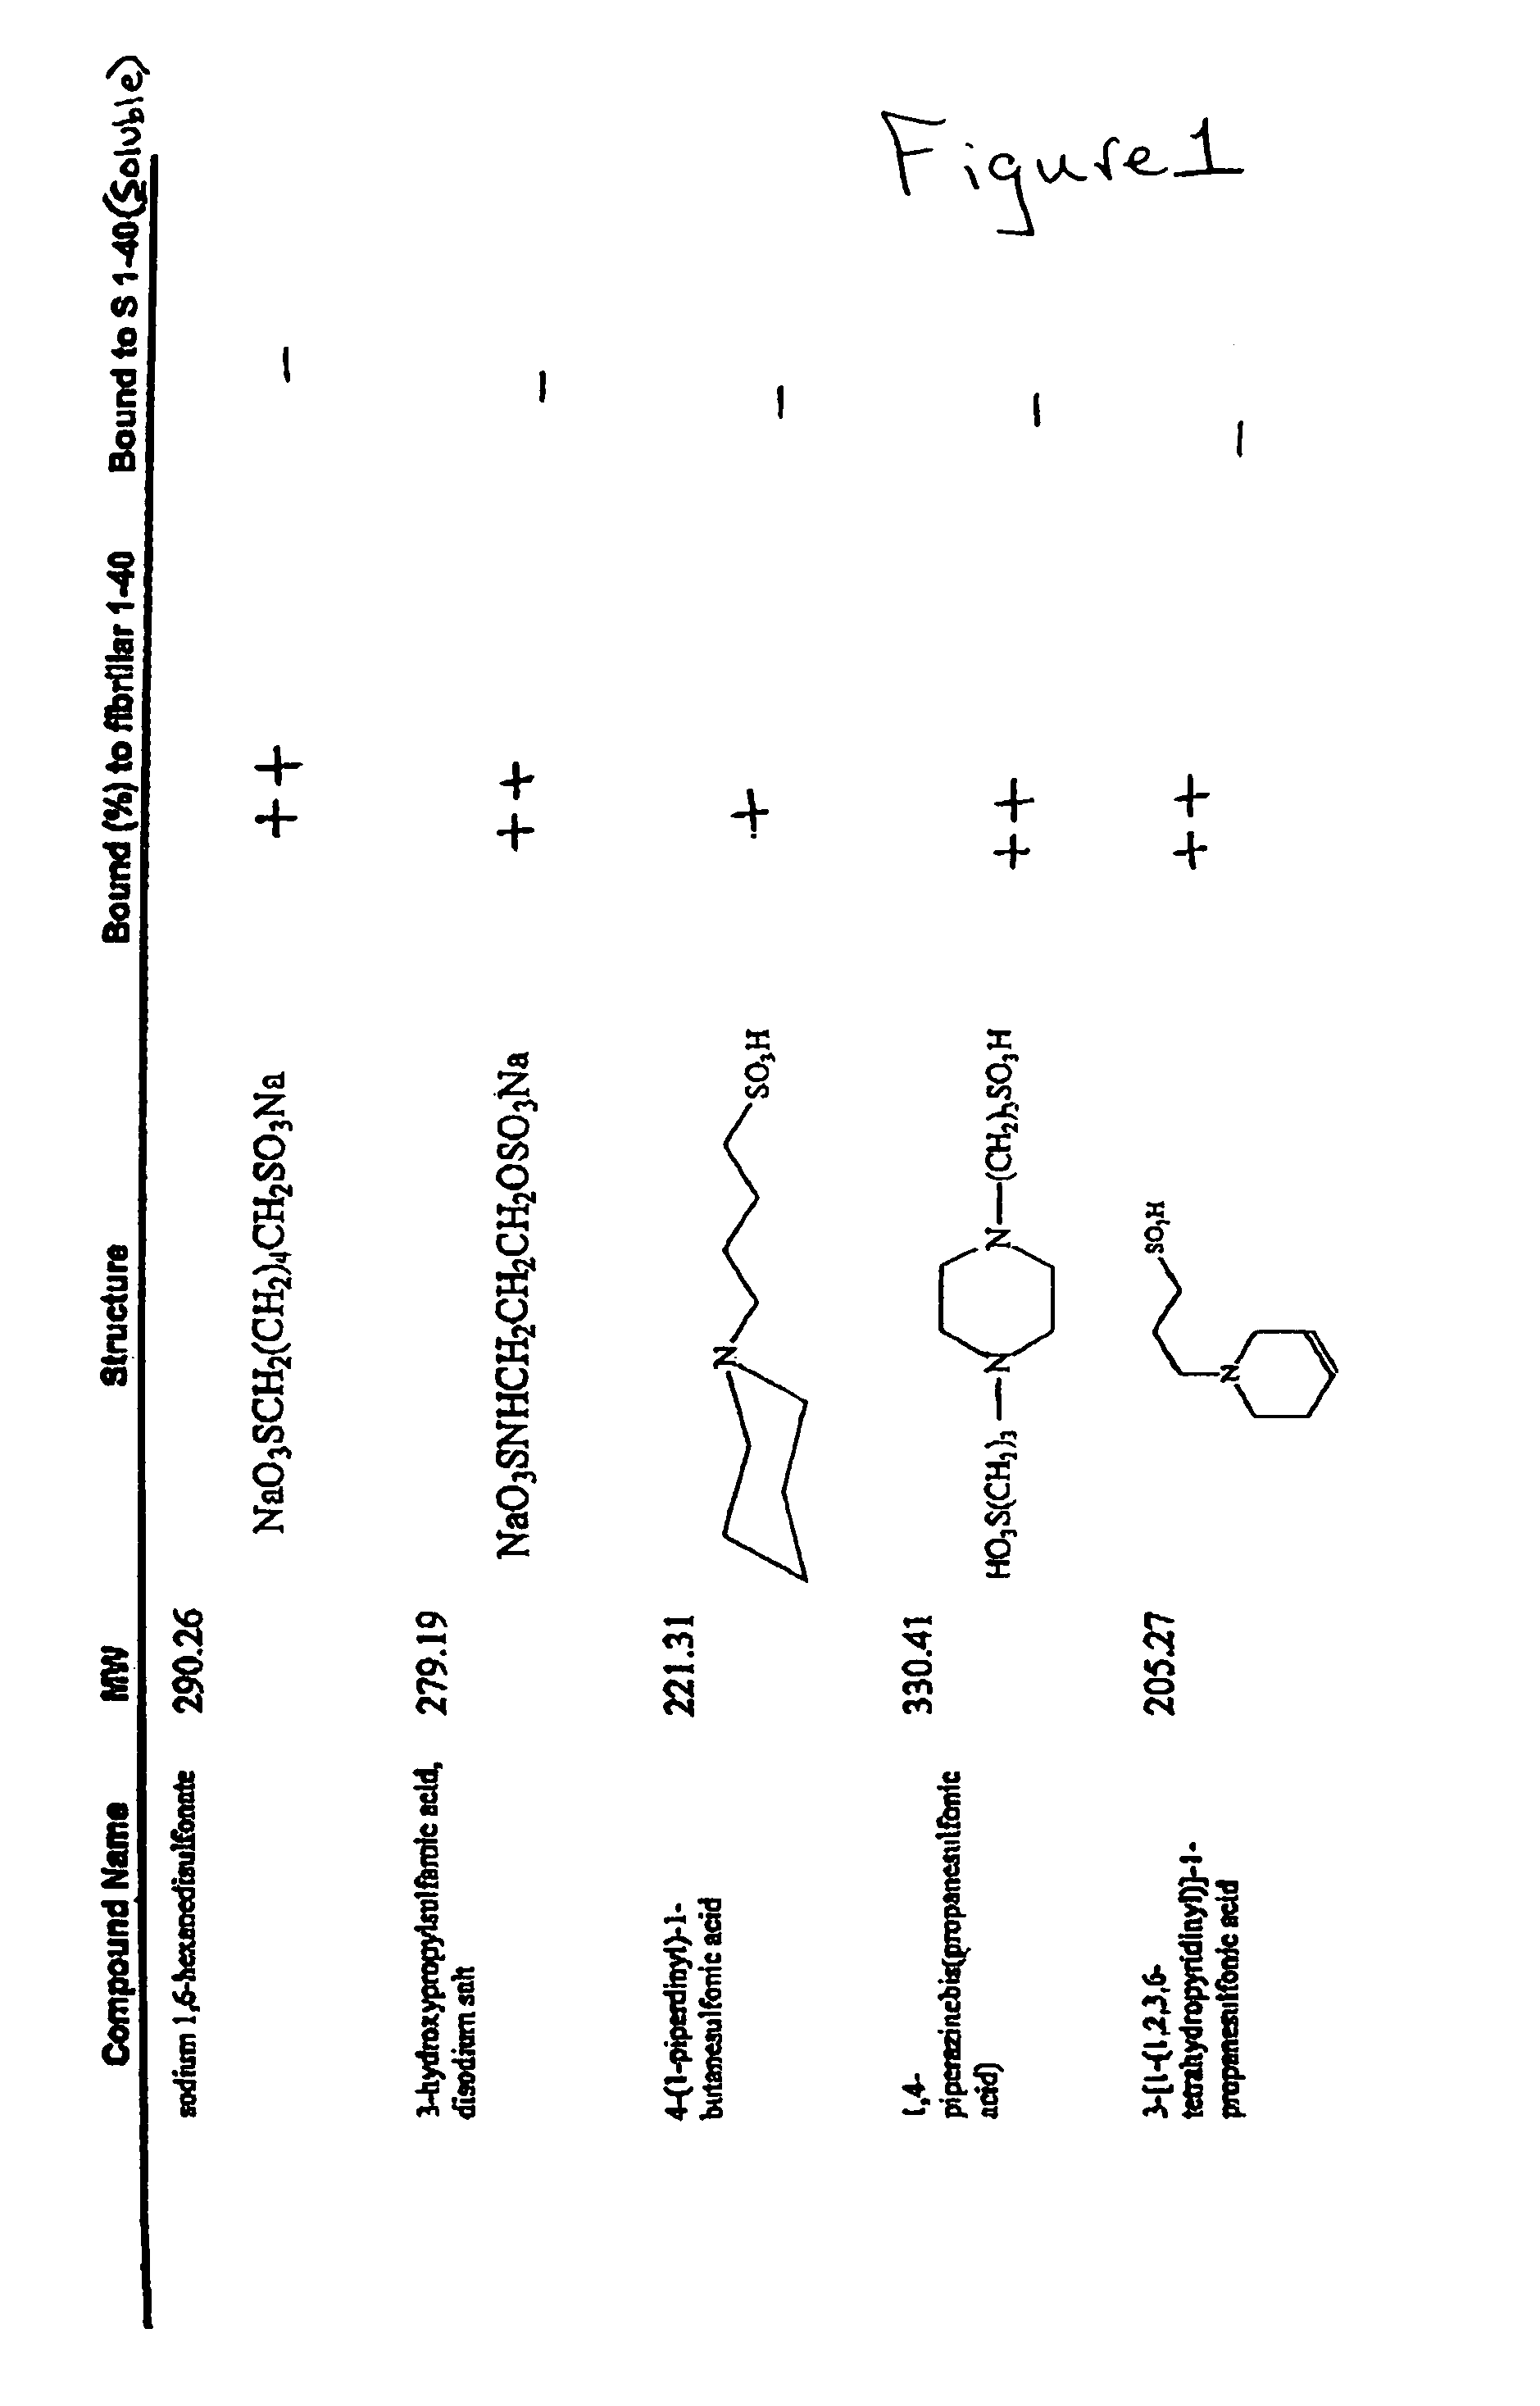 Amyloid targeting imaging agents and uses thereof